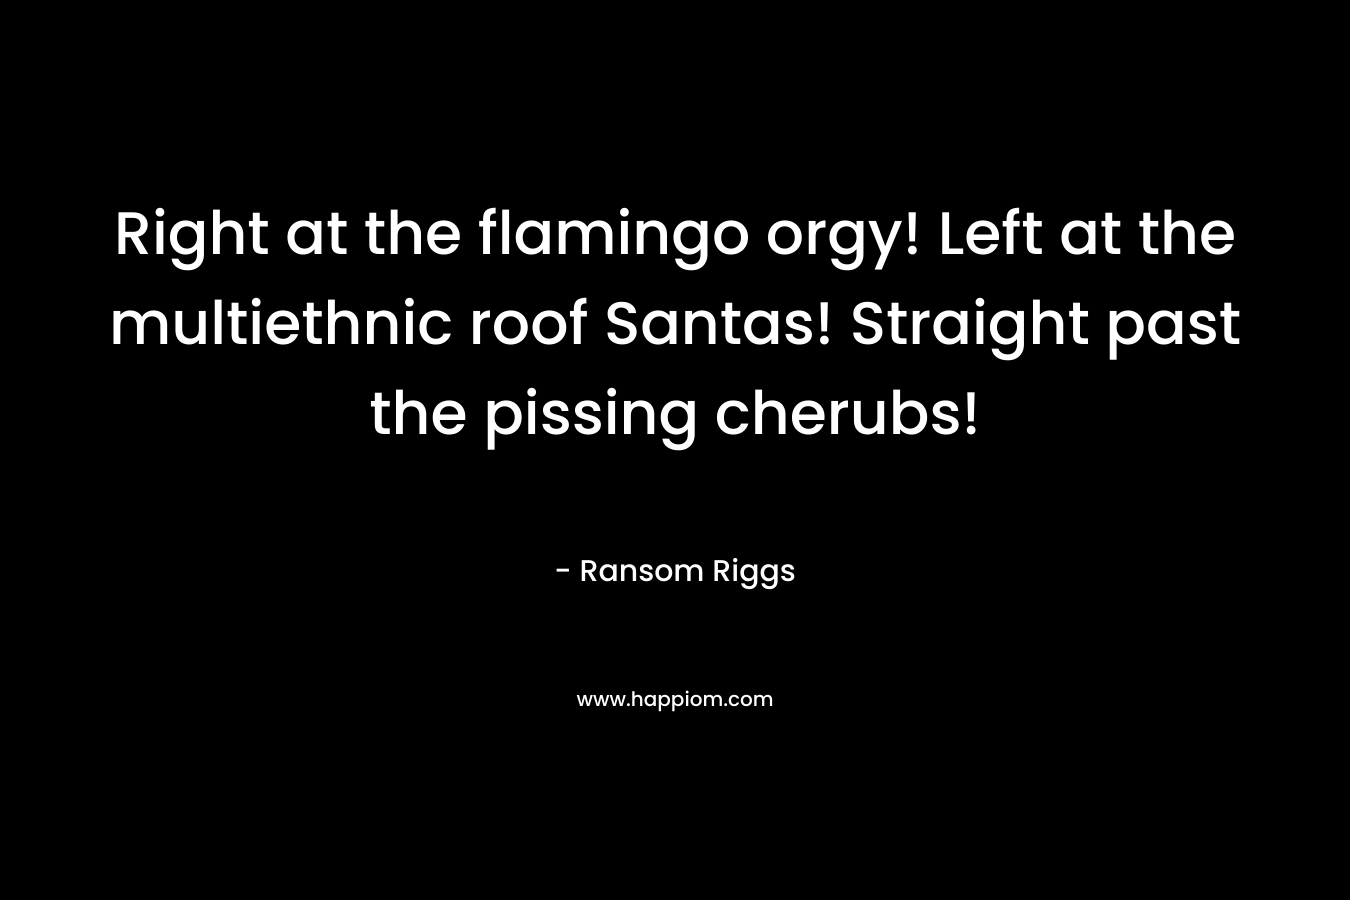 Right at the flamingo orgy! Left at the multiethnic roof Santas! Straight past the pissing cherubs!